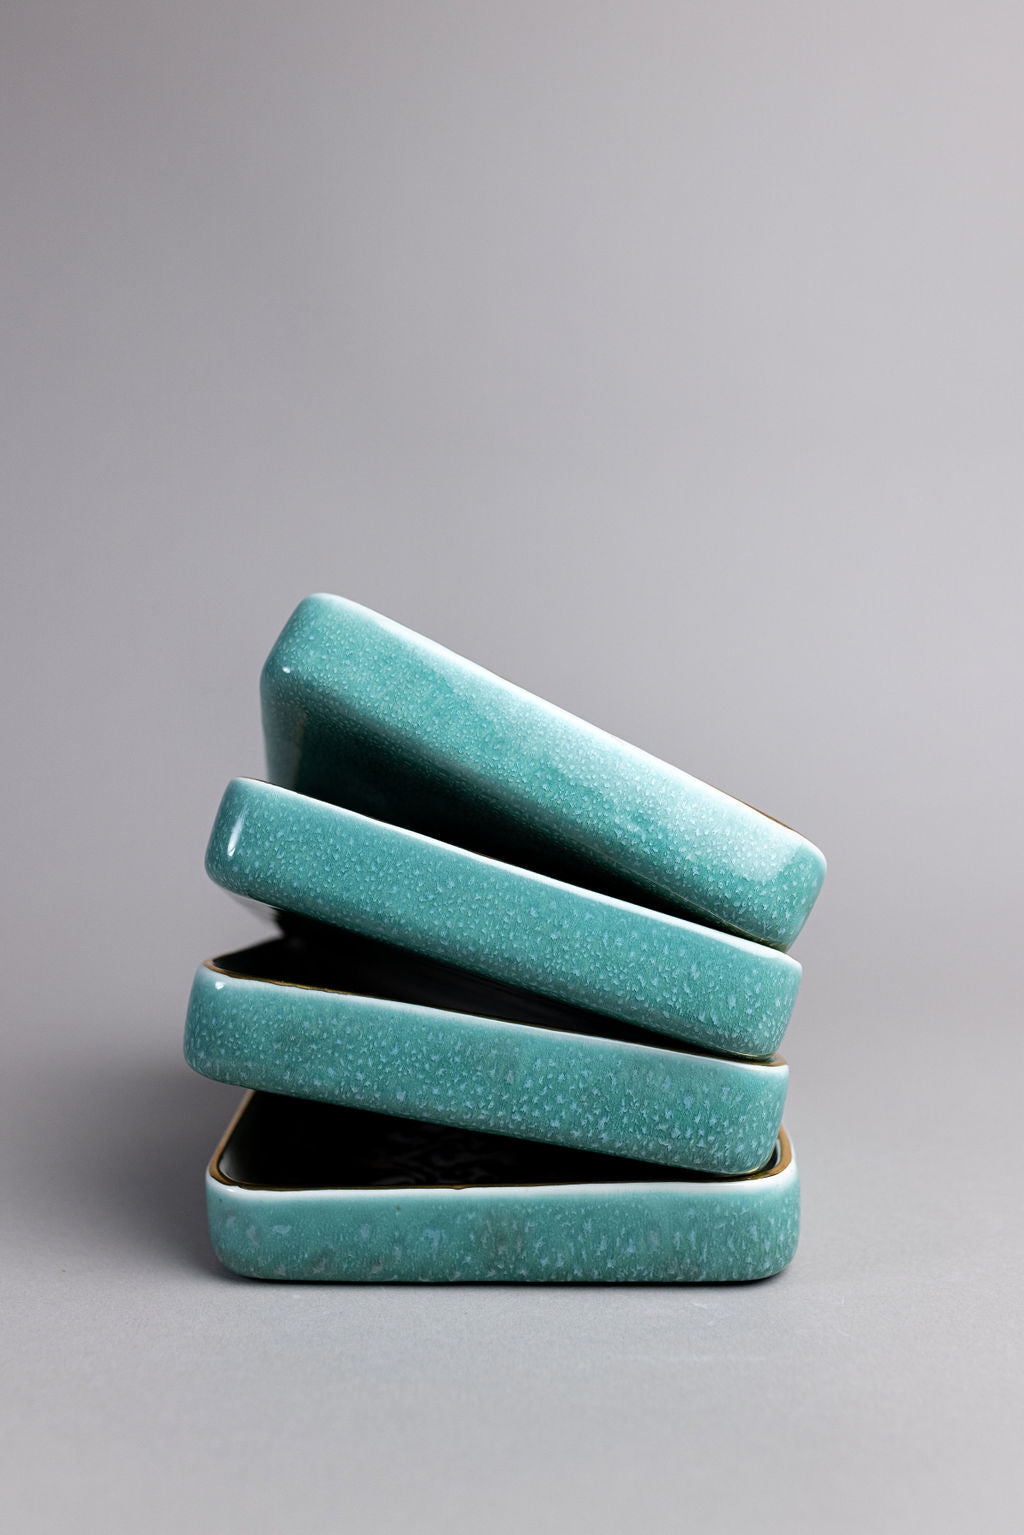 Square Ceramic Serving Plates | Turquoise And White With Black Prints | Set of 4